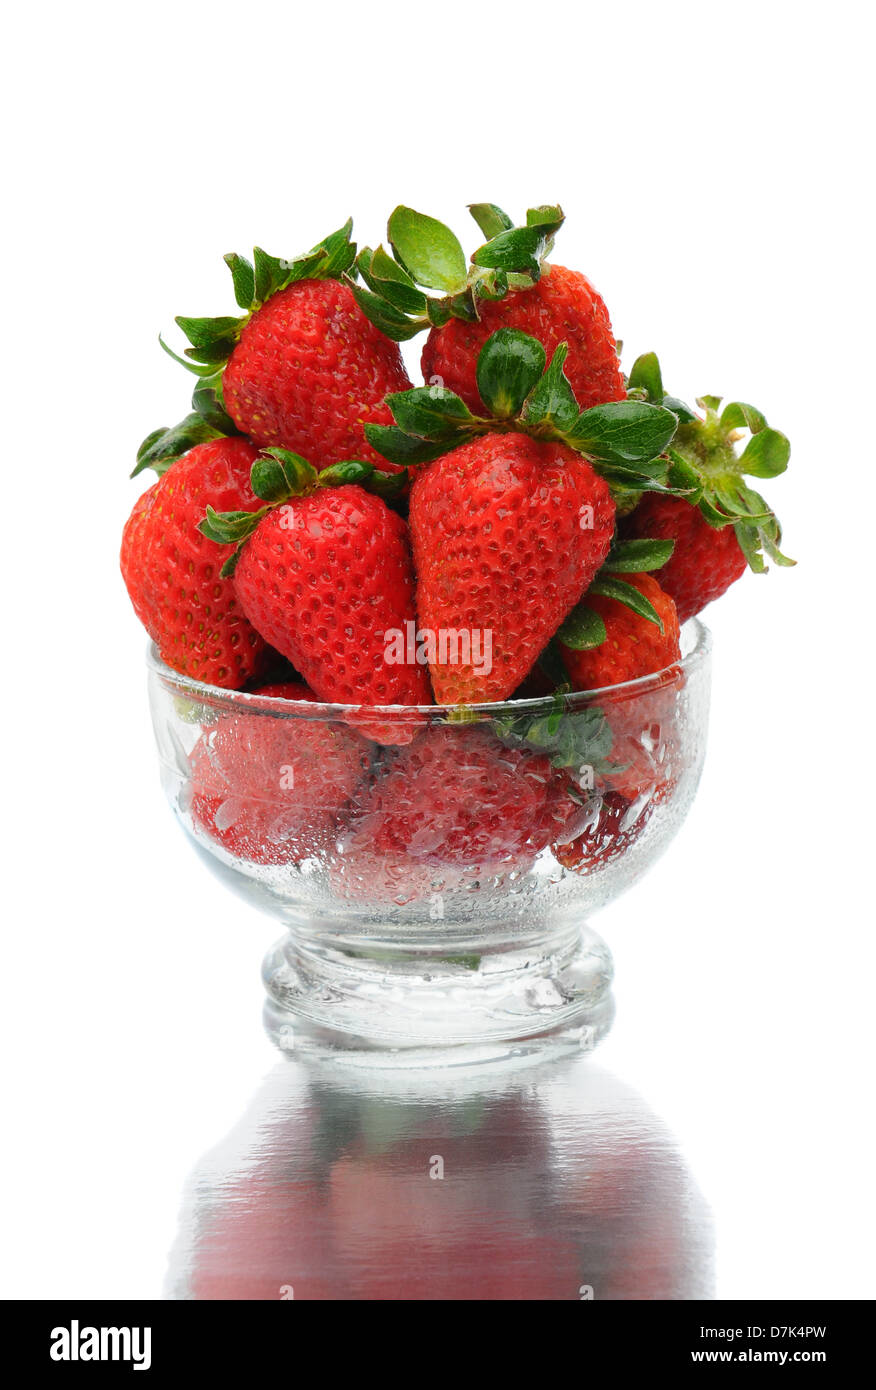 Closeup of fresh picked strawberries in a glass bowl with reflection over a white background. Stock Photo